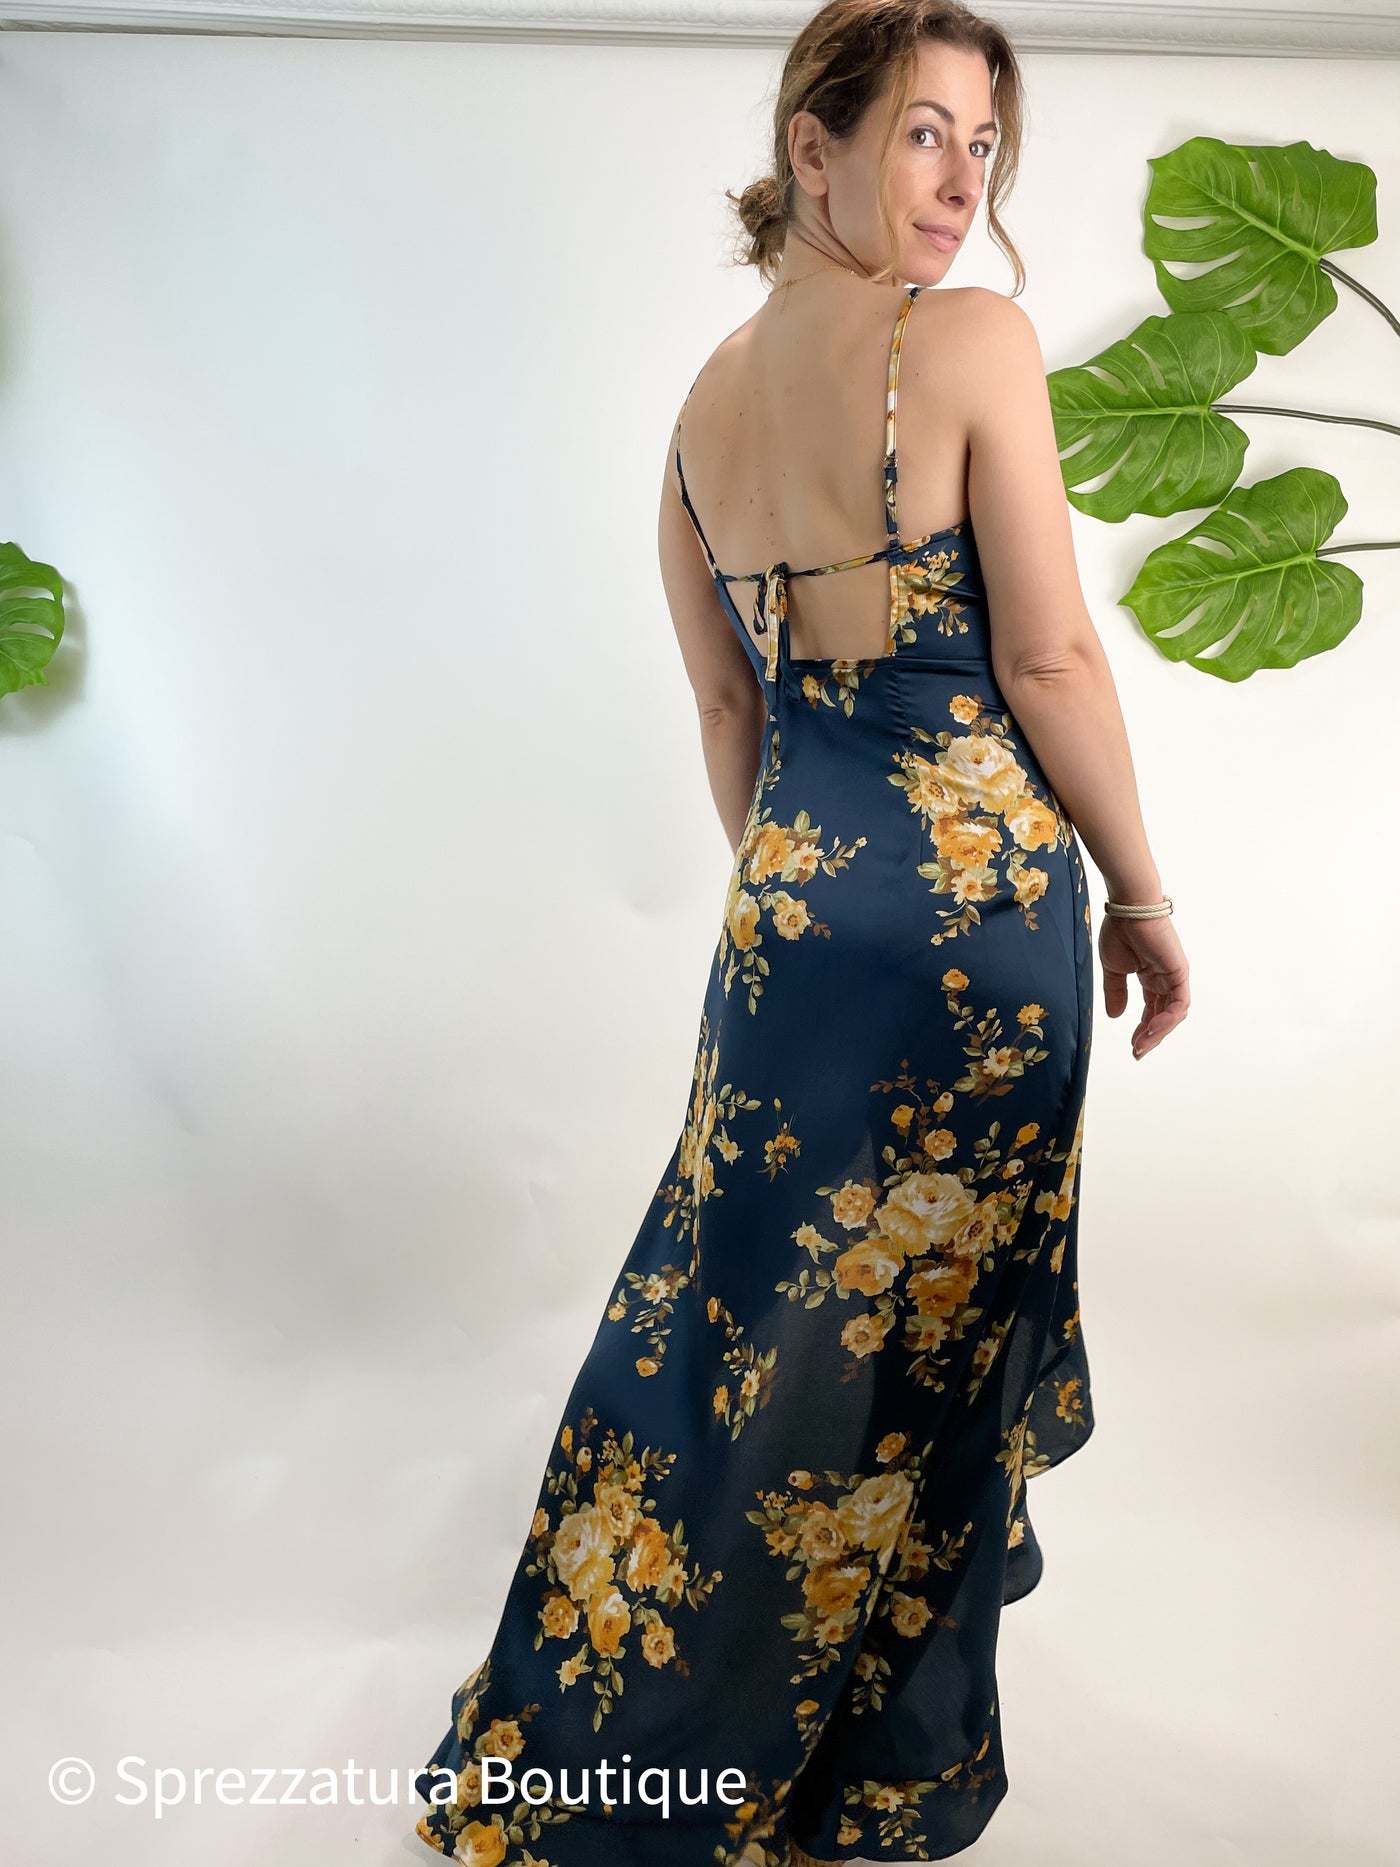 Navy dress with yellow roses floral pattern on satin. Dark blue dress with high slit and ruffle. Open back dress for wedding guest, special occasion, or event. Dressy women's formal dress. Modern smart causal female chic effortless outfit womens ladies gift elegant effortless clothing clothes apparel outfits chic summer style women’s boutique trendy cute wedding guest outfit dress